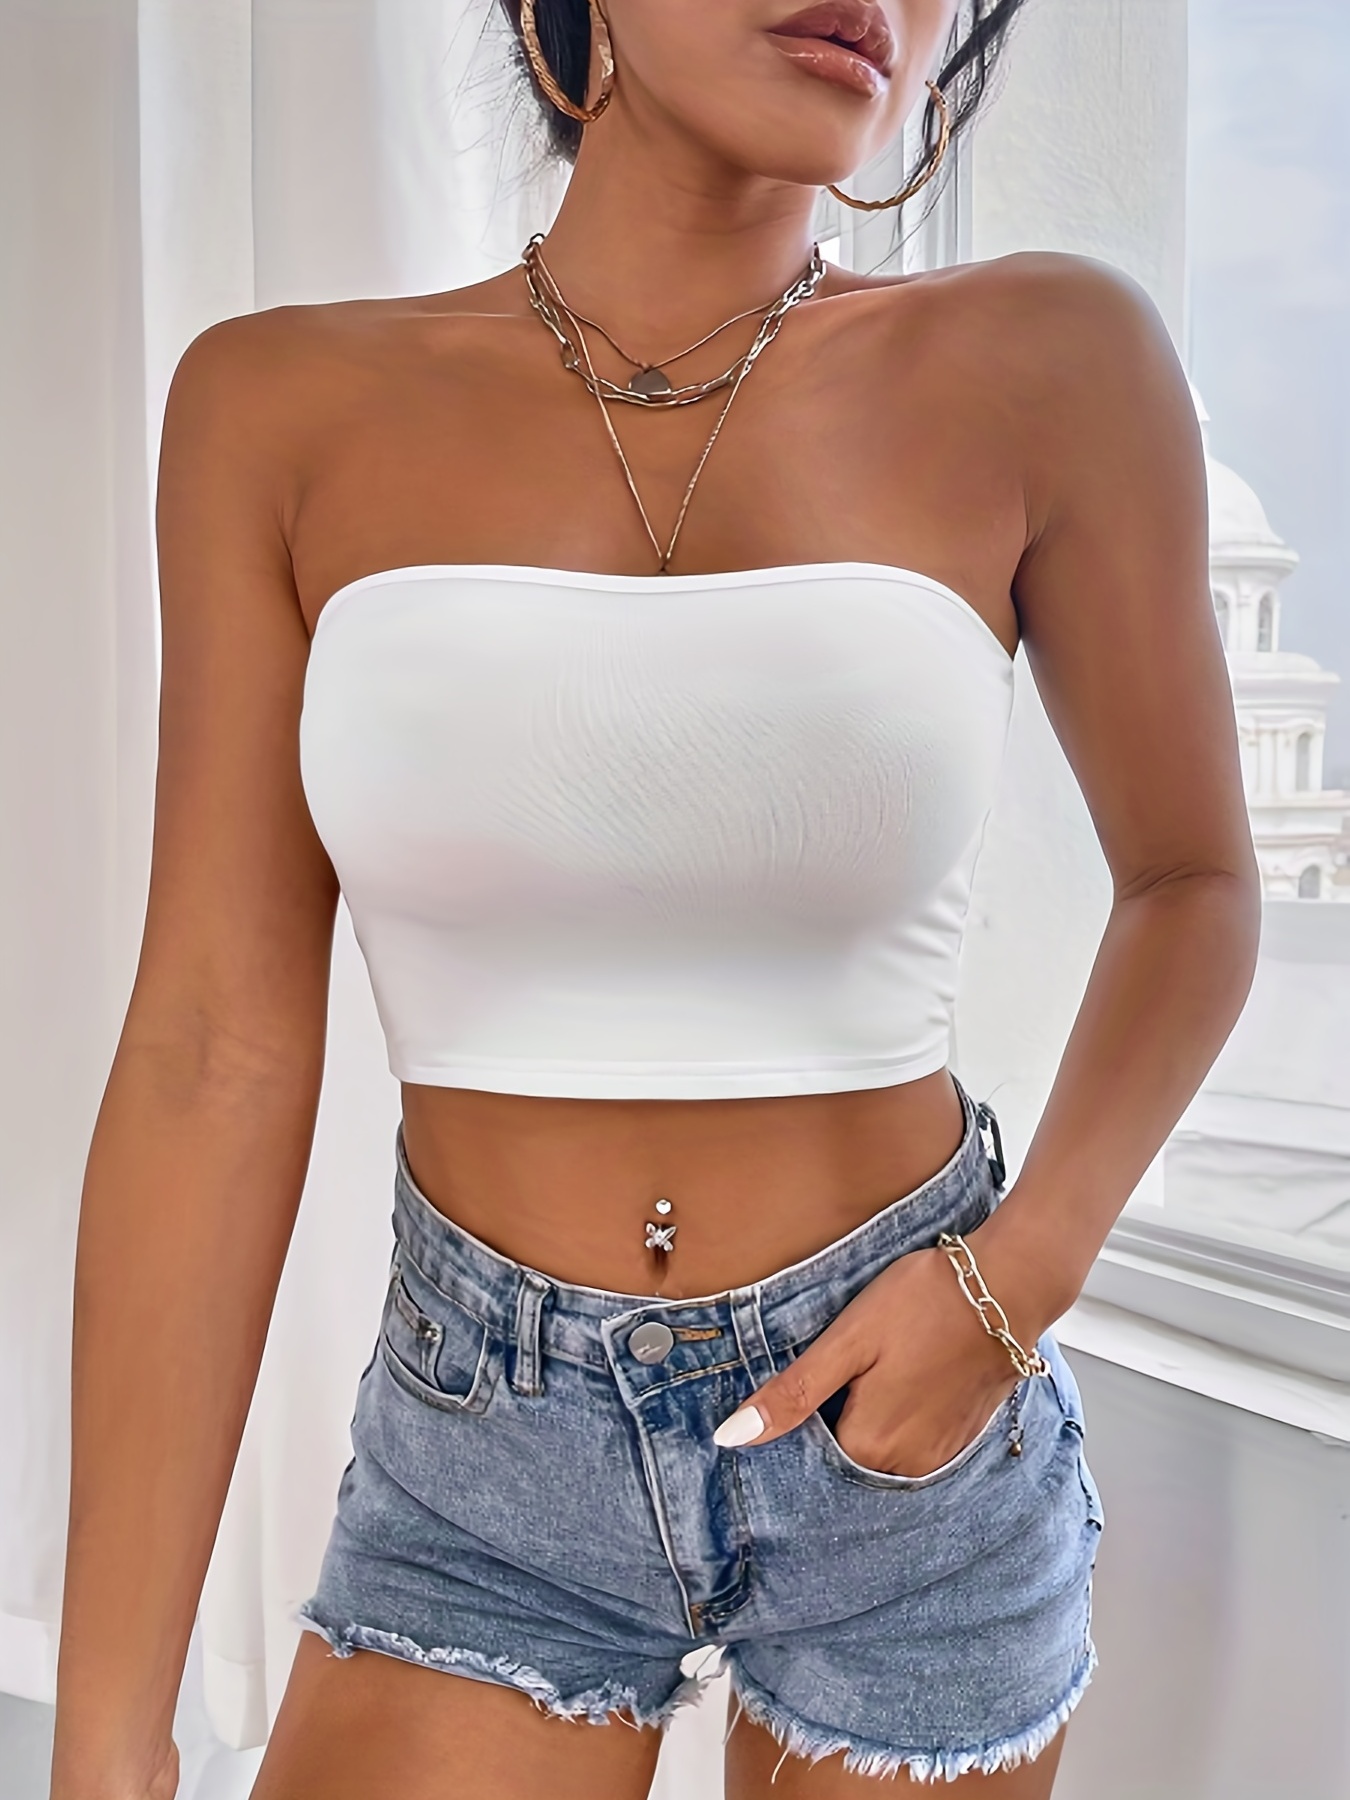 Women Summer Short Cropped Tank Top Solid Color Spaghetti Strap